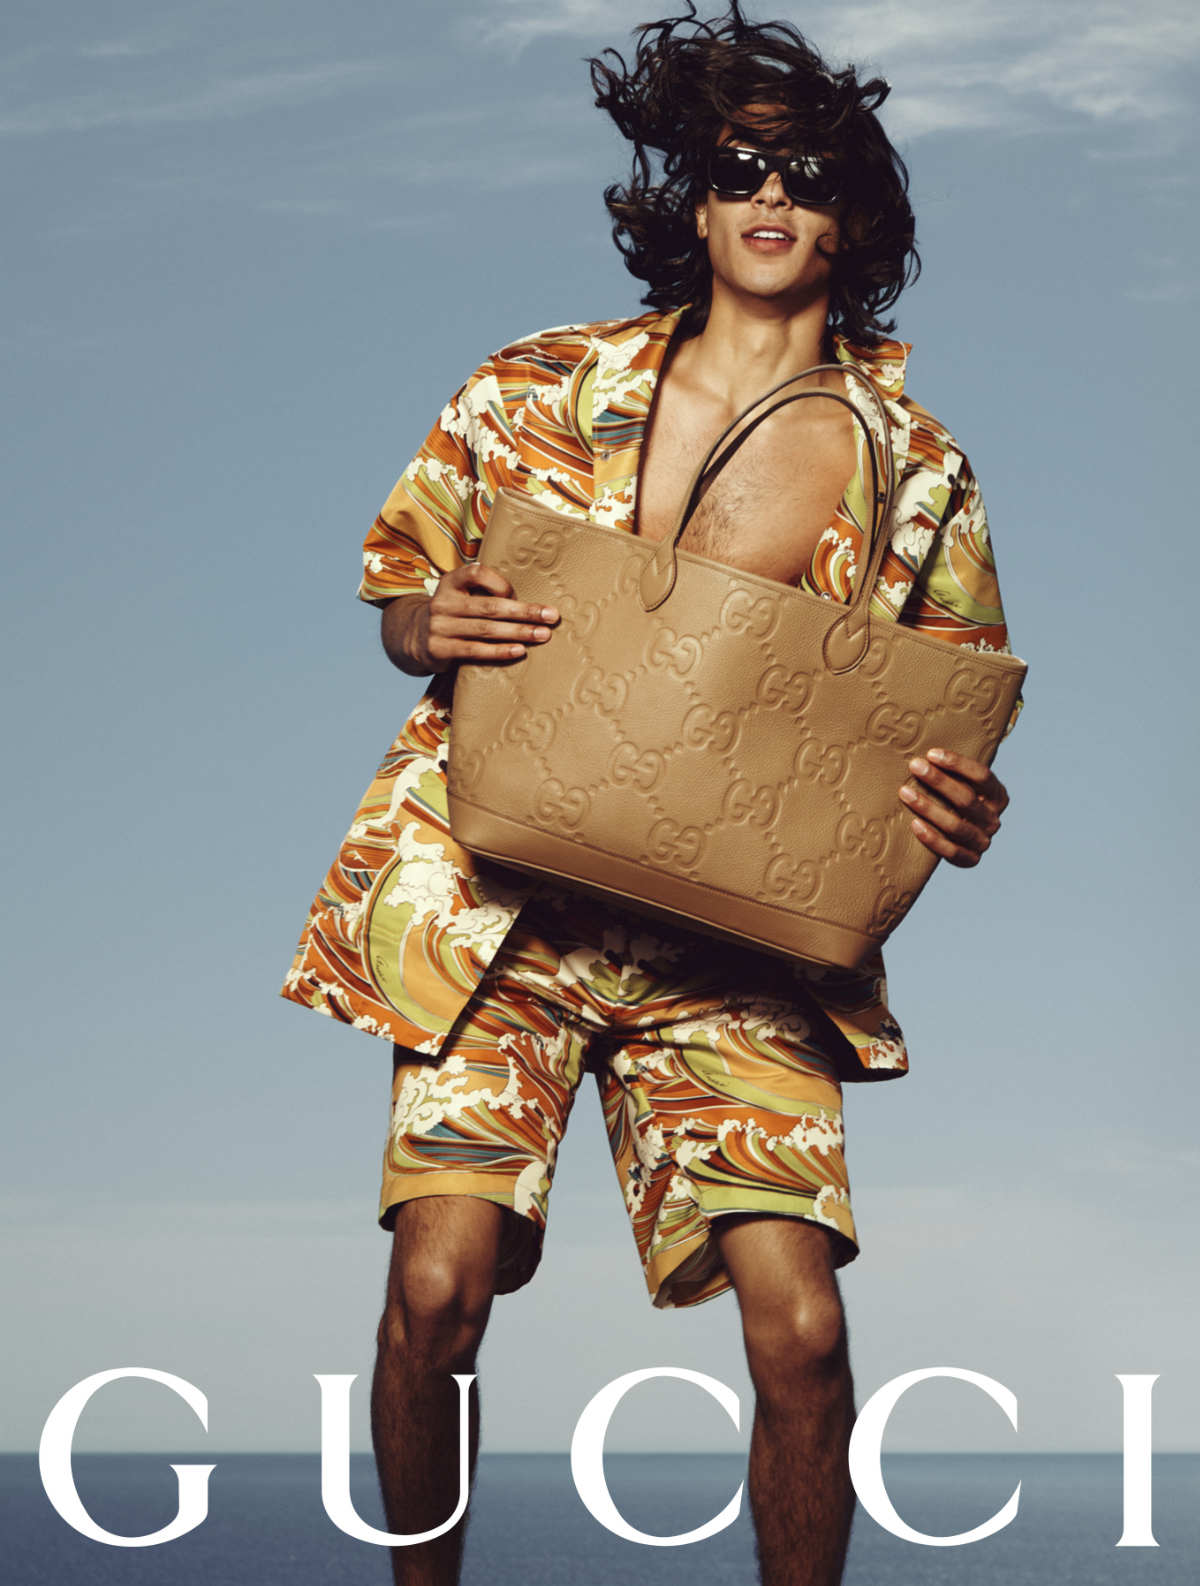 Gucci Summer Stories, A New Collection Designed To Capture The Spirit Of Summer